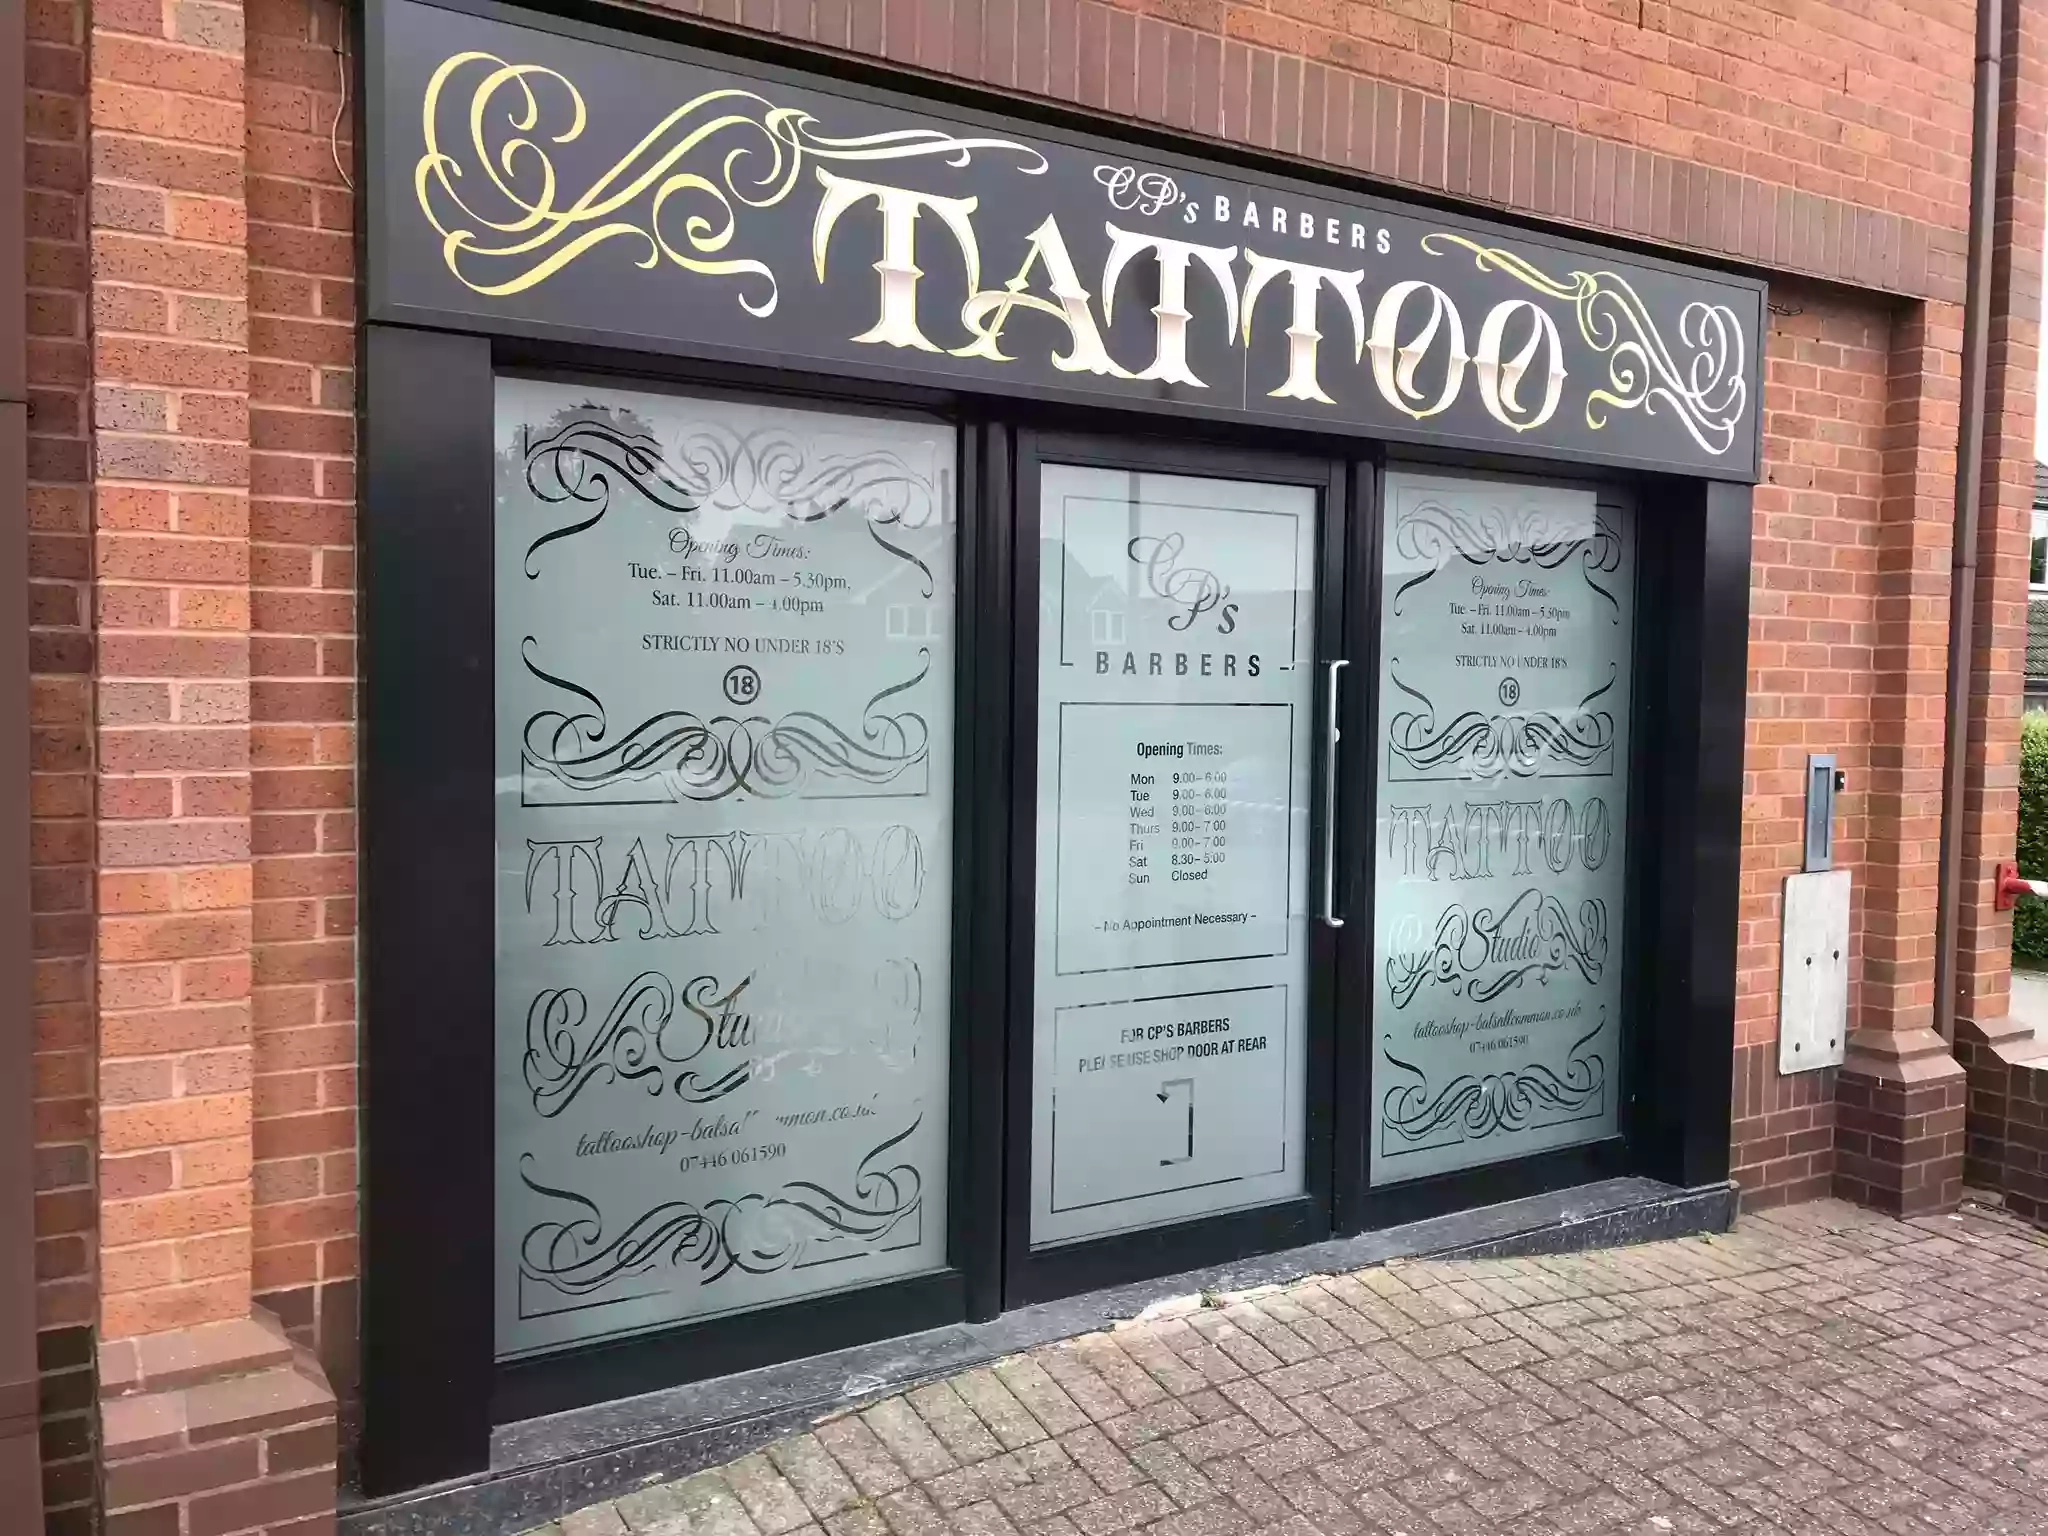 The Tattoo Shop – Balsall Common